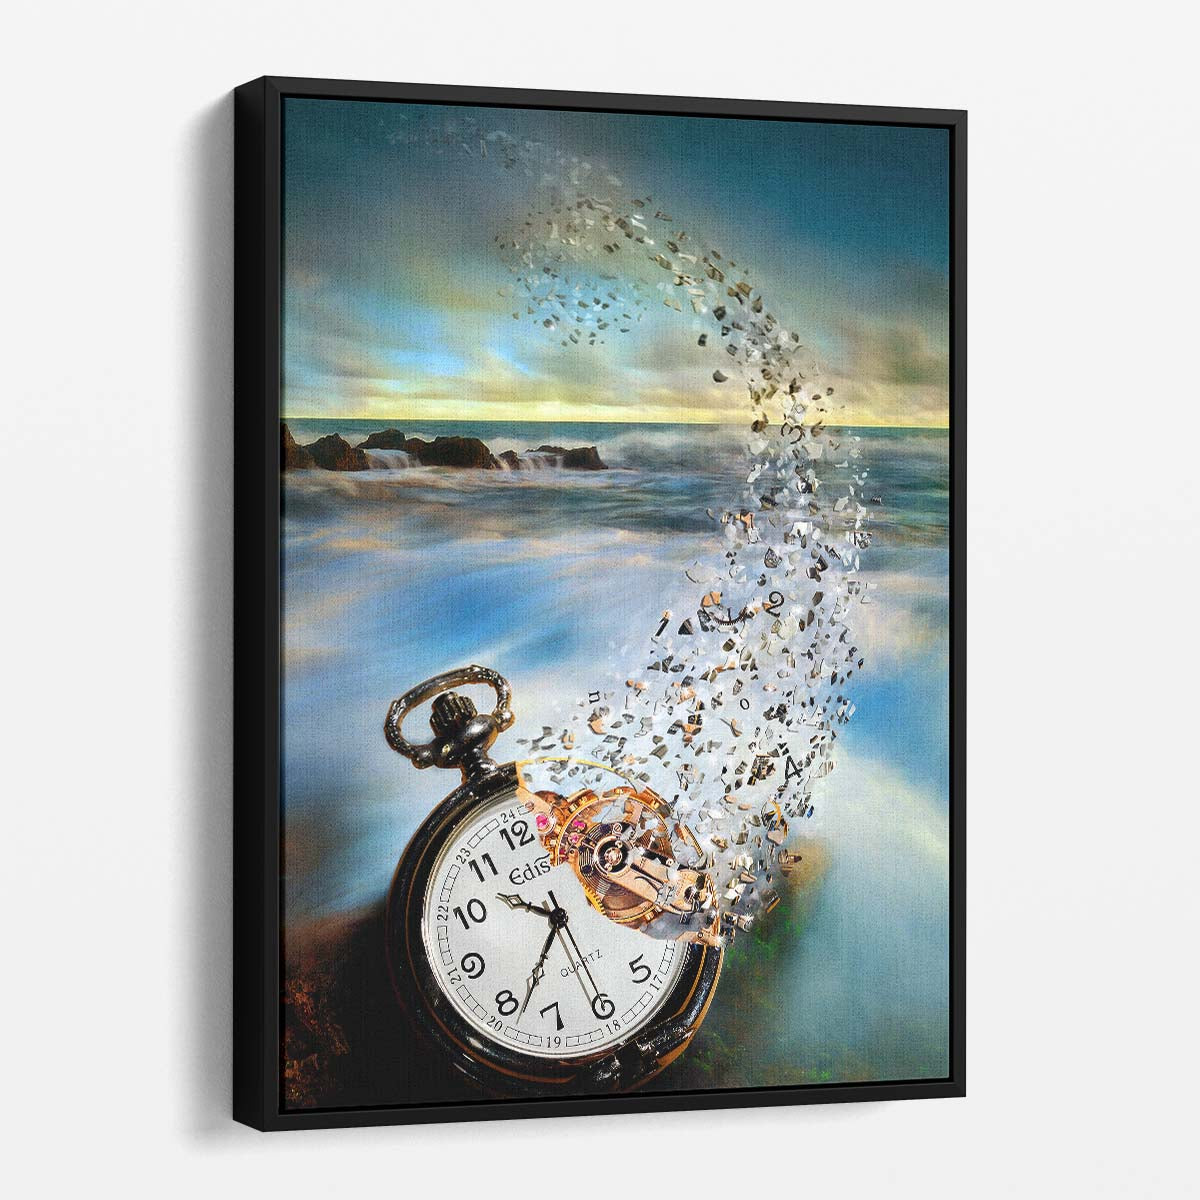 Surreal Time Vanishing Photography Art by Sandy Wijaya by Luxuriance Designs, made in USA